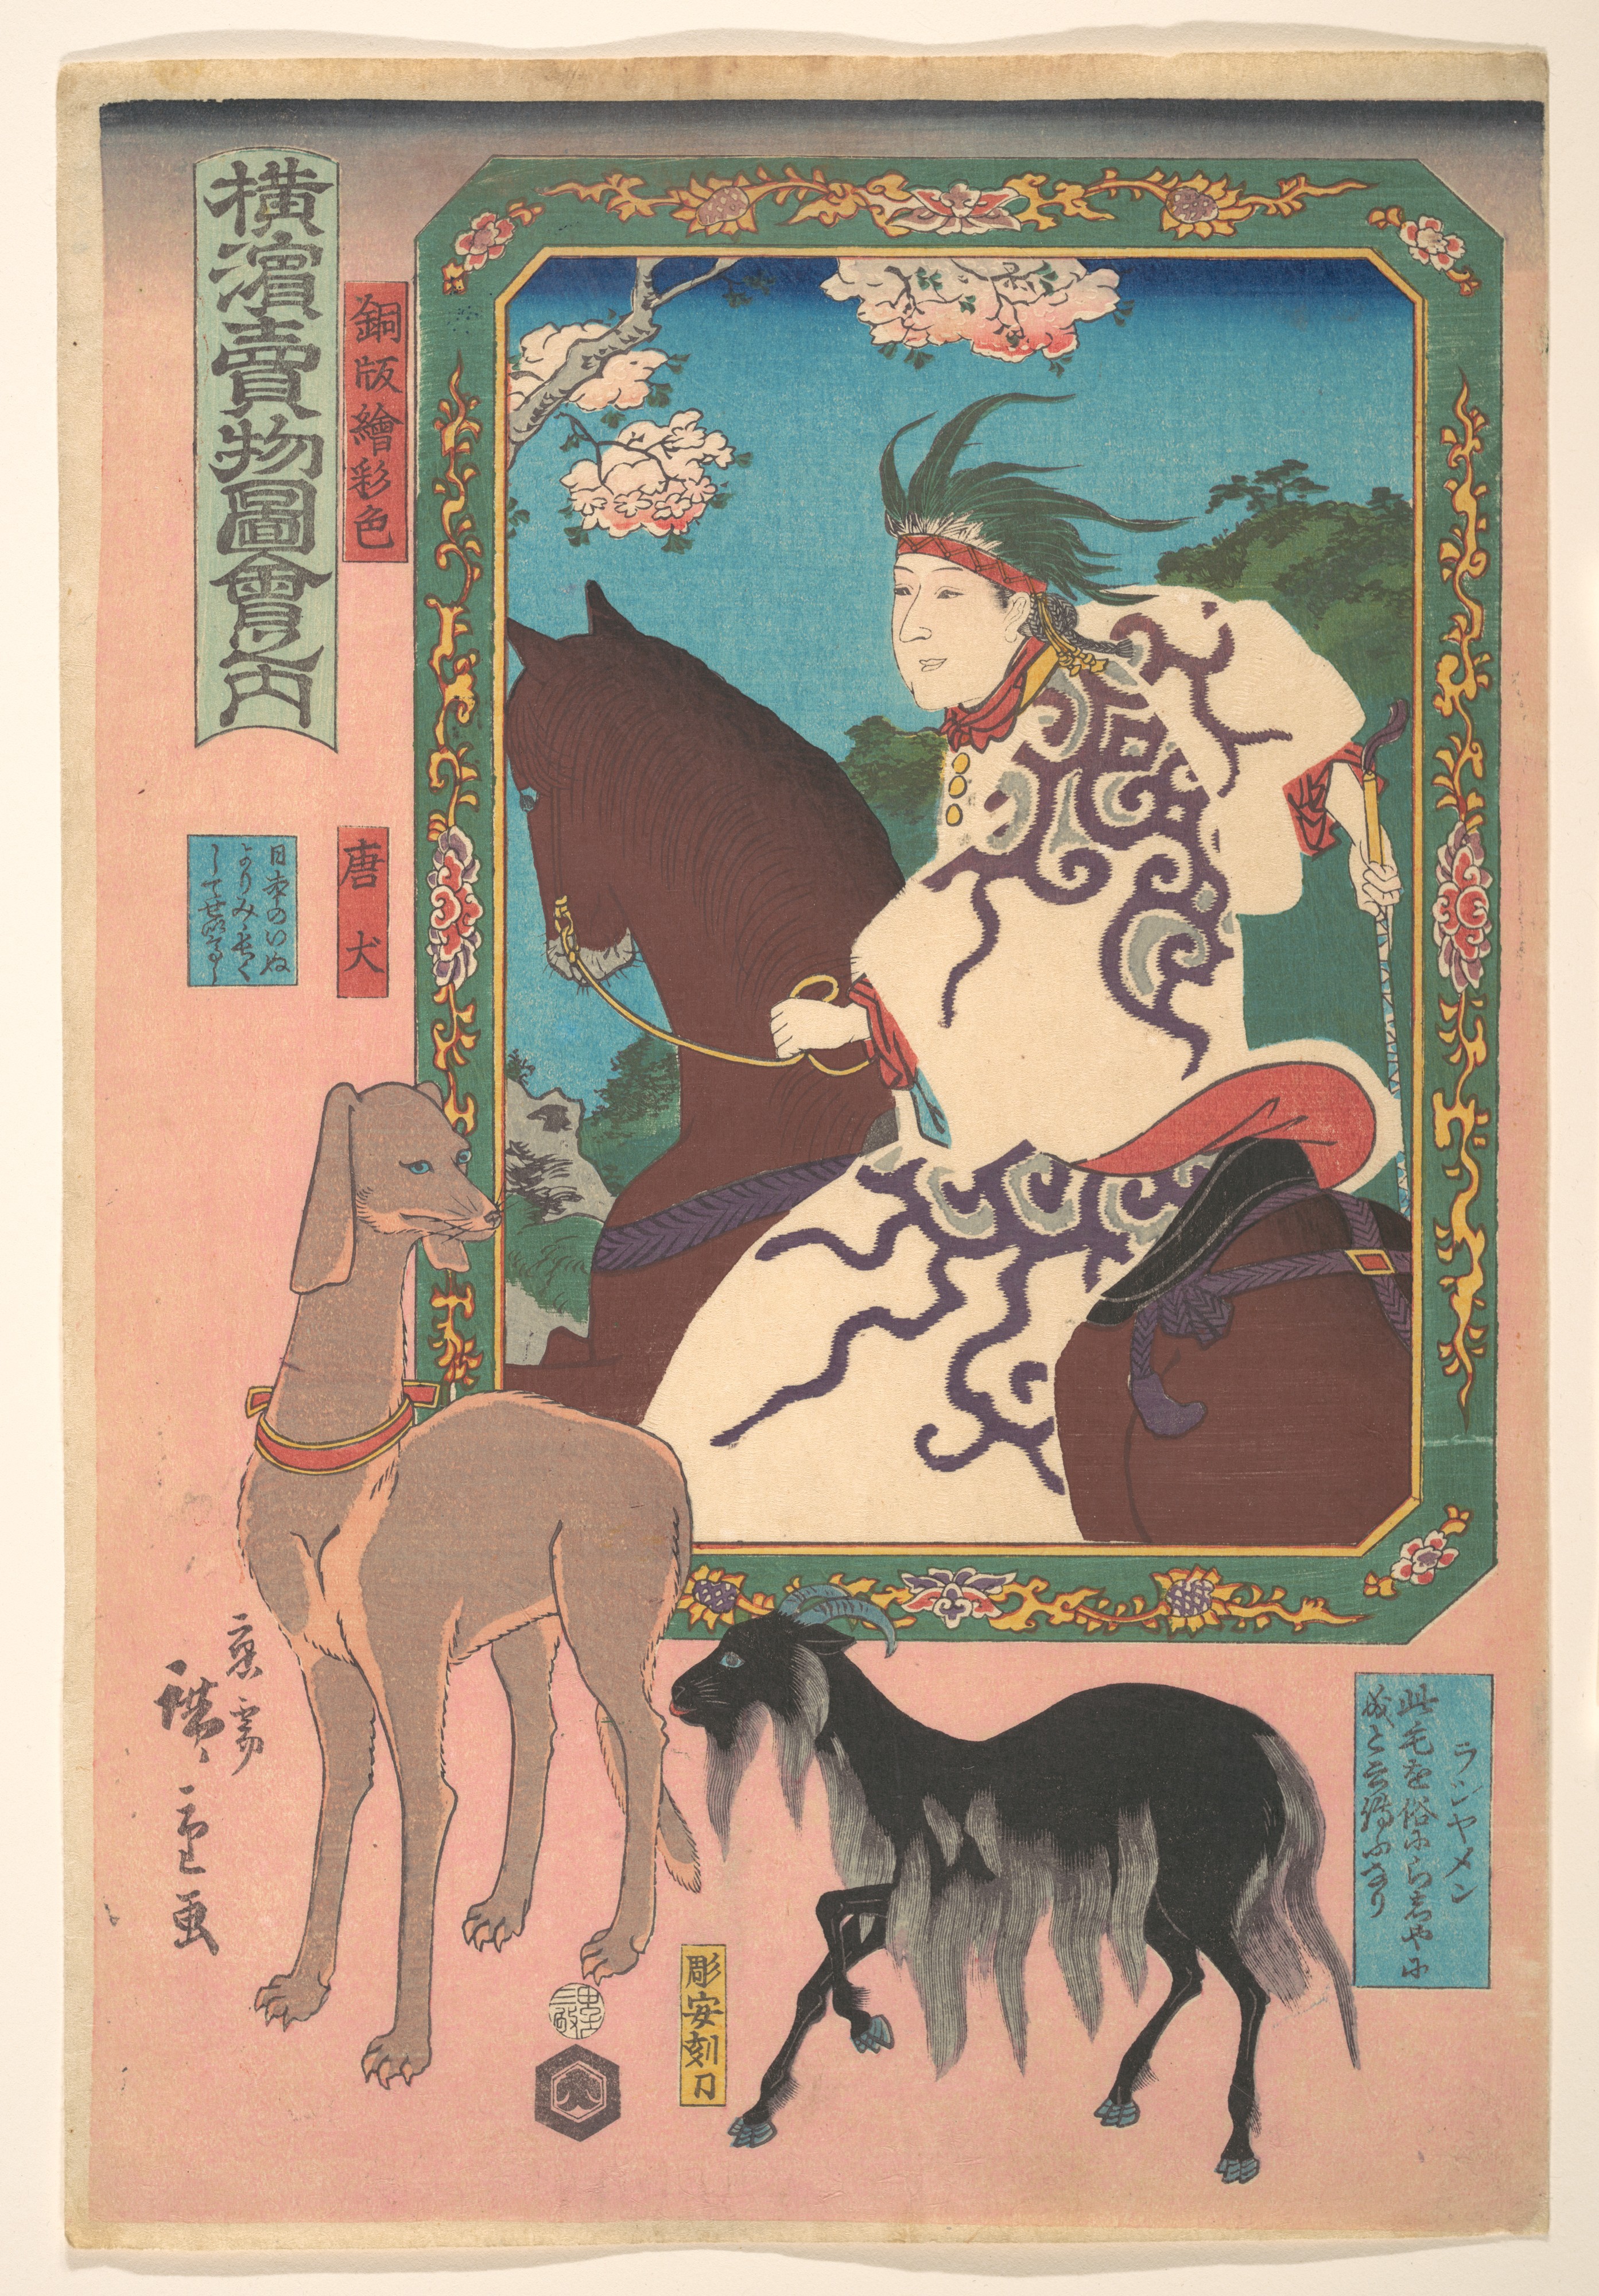 Utagawa Hiroshige Ii Copper Plate Engraving Of A Woman Riding A Horse A Goat And A Dog Japan Edo Period 1615 1868 The Metropolitan Museum Of Art